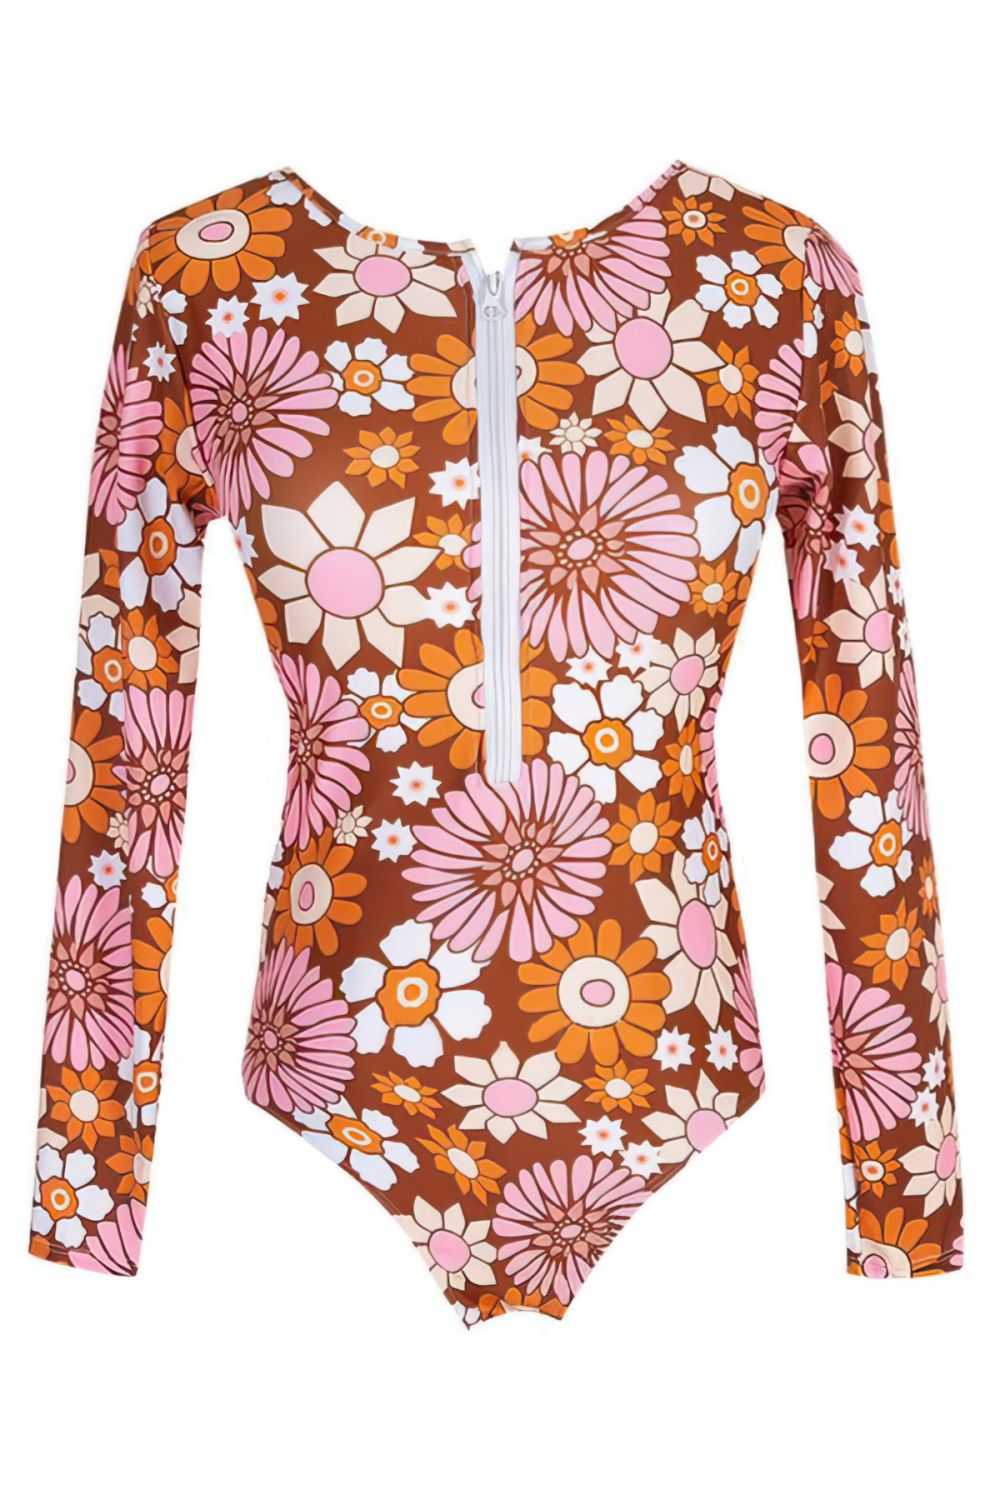 Yellow Floral Surf Long Sleeve One Piece Zipper Swimsuit